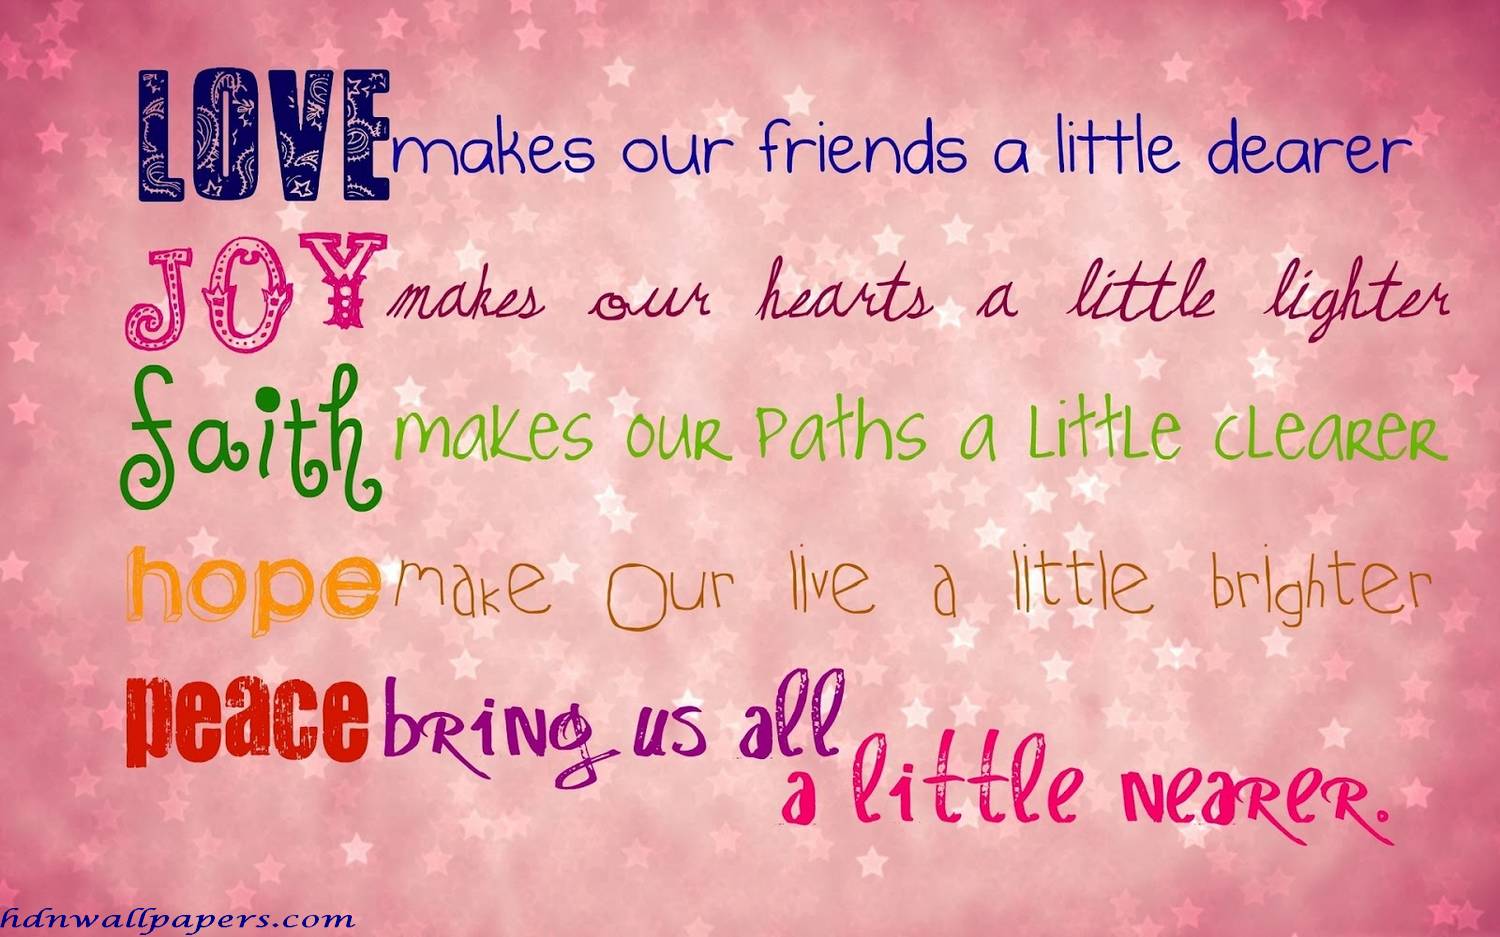 Cute Love Quotes Wallpaper Free Download For Laptop